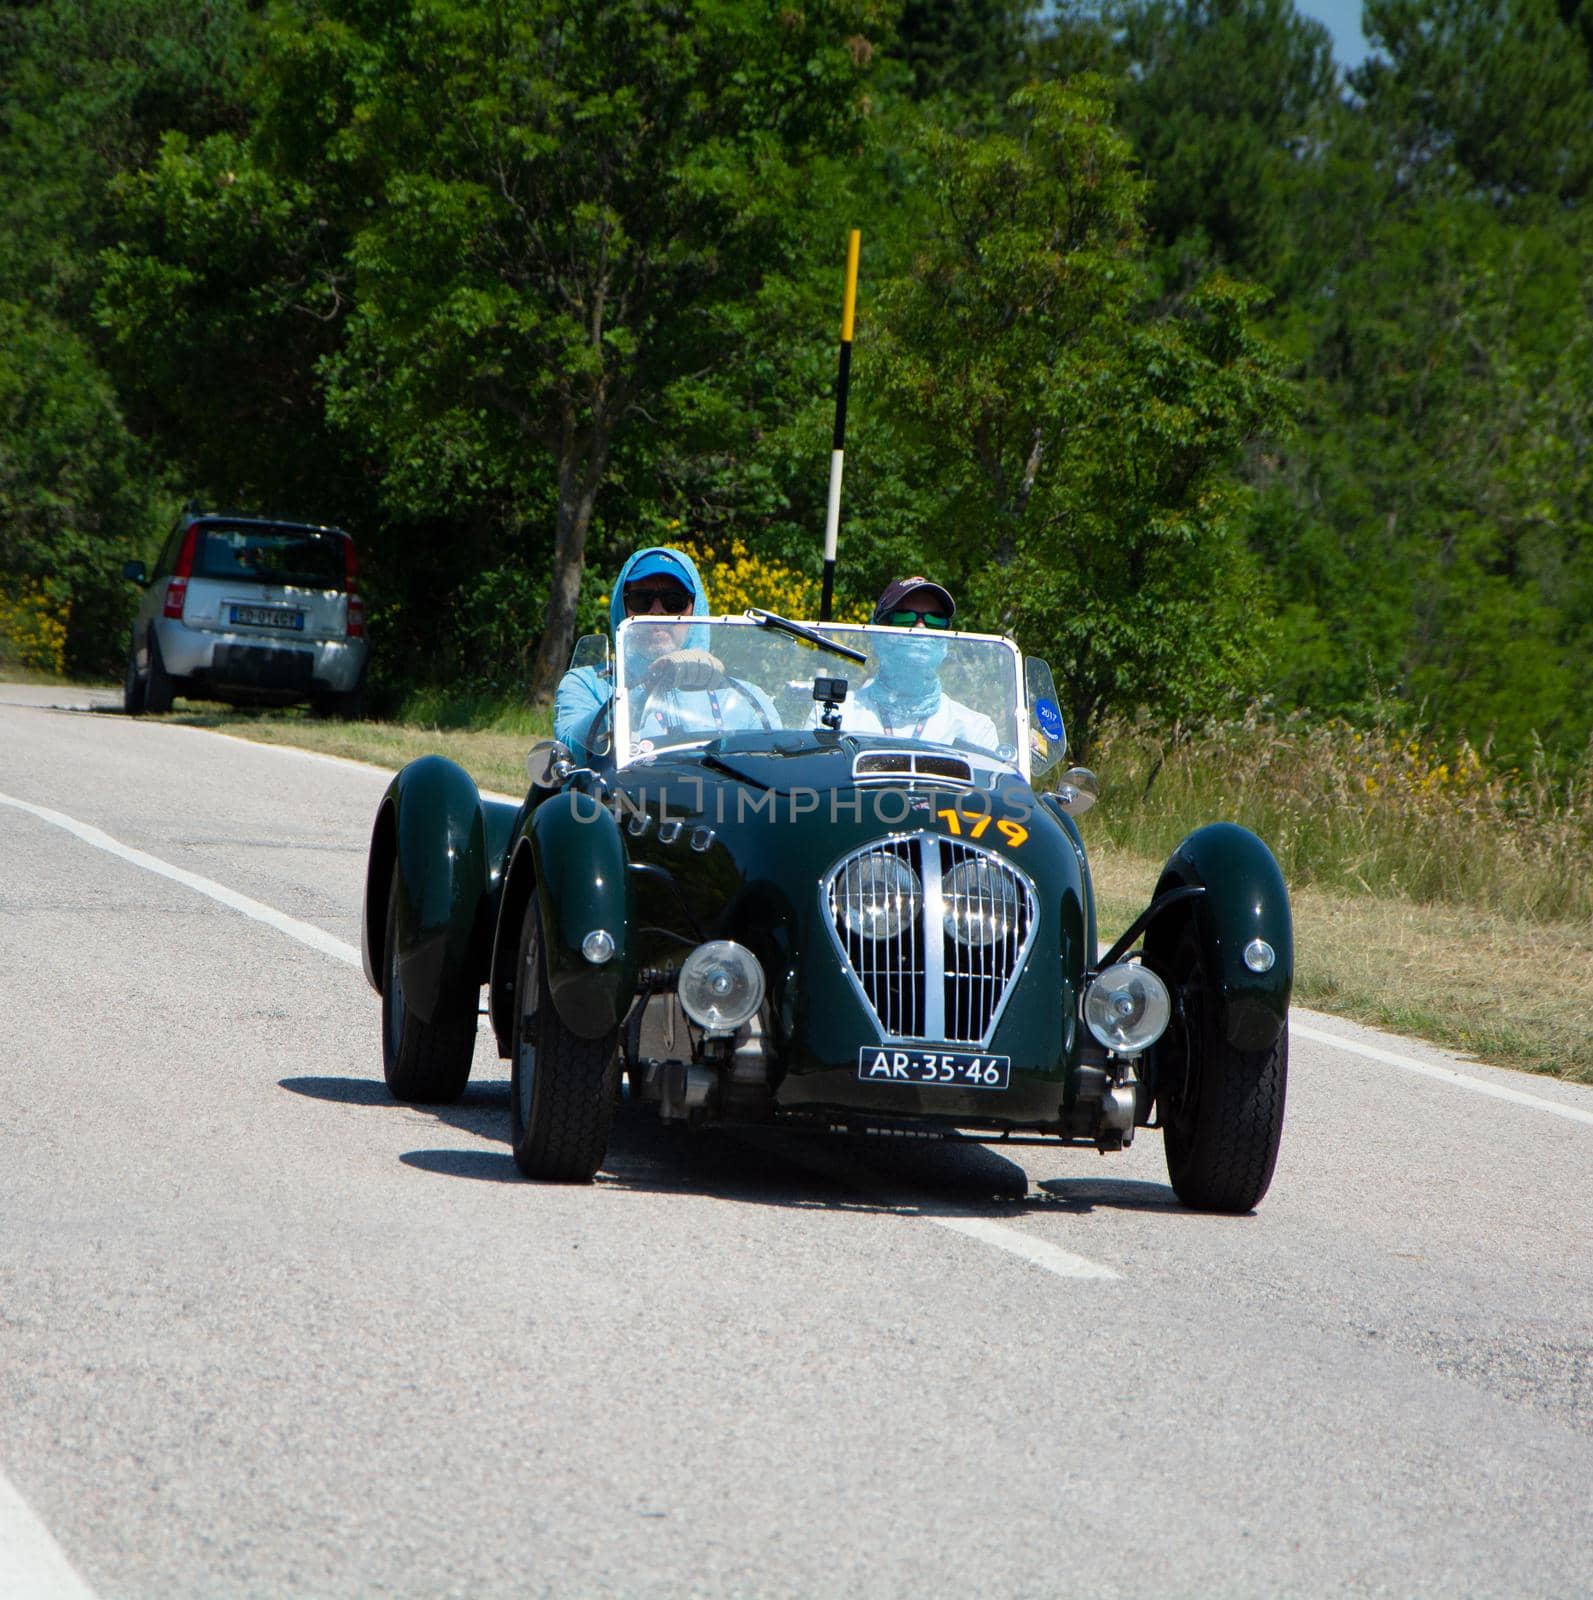 URBINO, ITALY - JUN 16 - 2022 : HEALEY 2400 SILVERSTONE (D-TYPE) 1950 on an old racing car in rally Mille Miglia 2022 the famous italian historical race (1927-1957